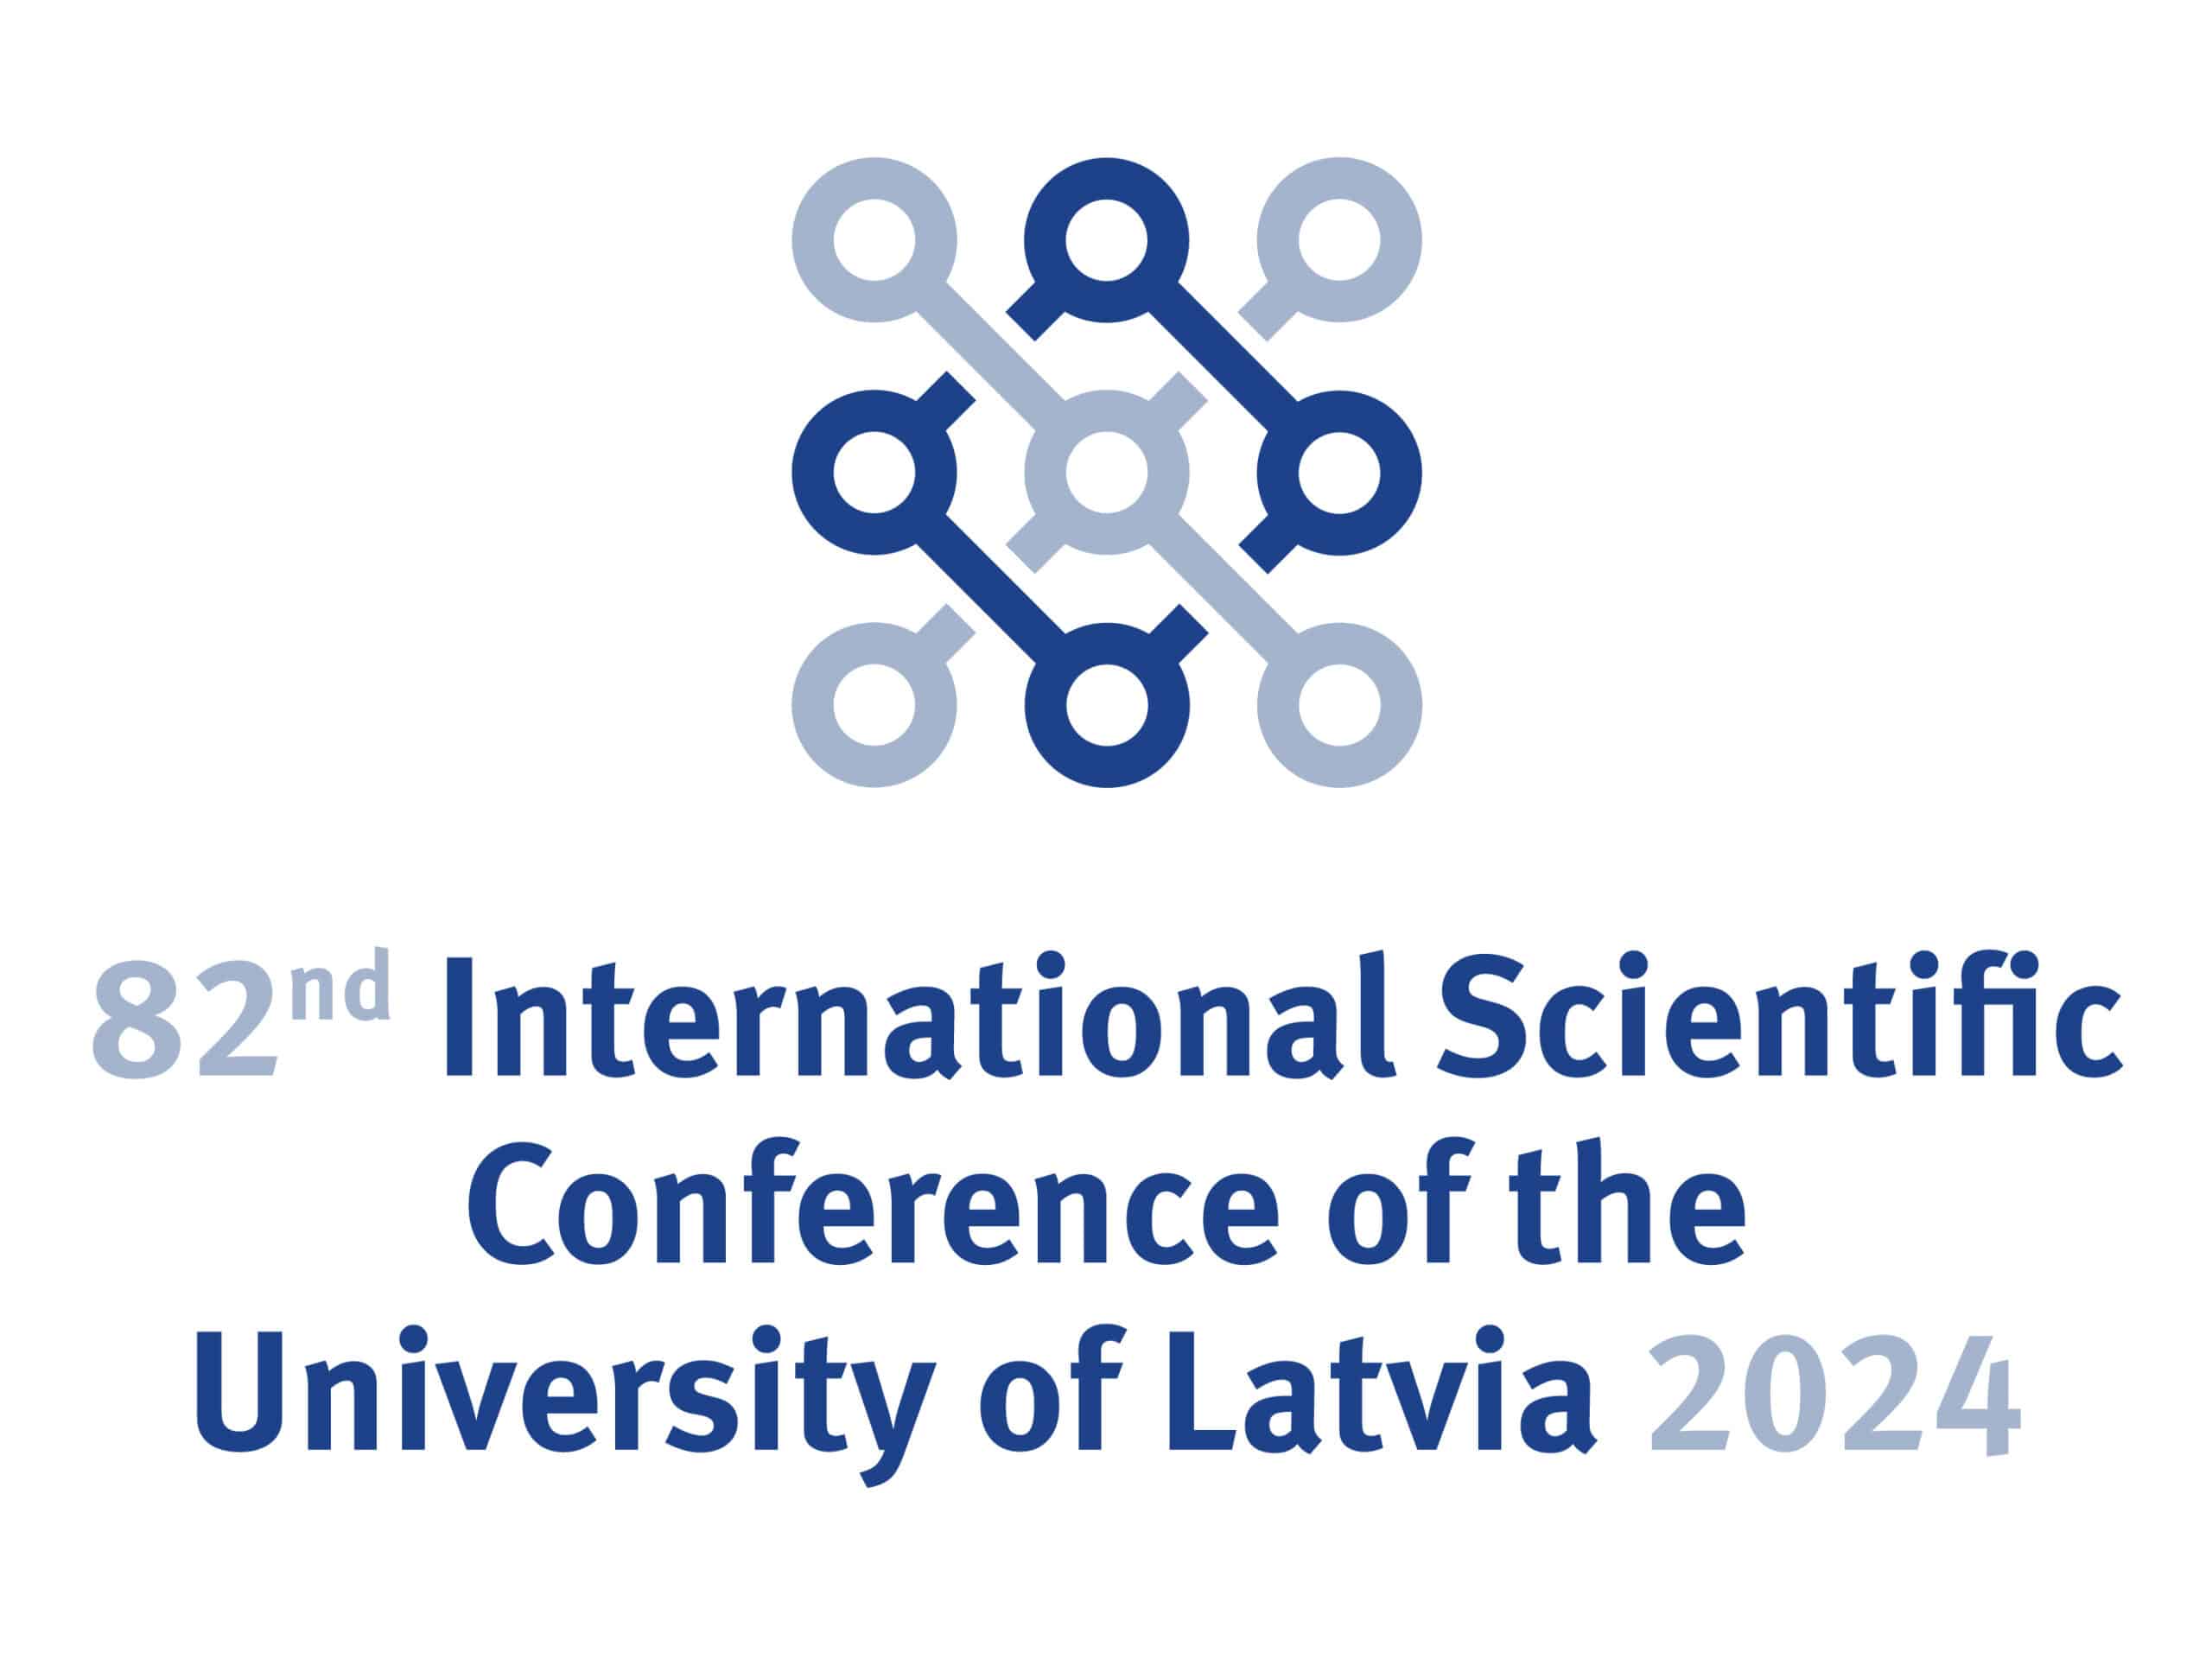 We invite you to submit a title of presentation for the scientific conference by February 4th